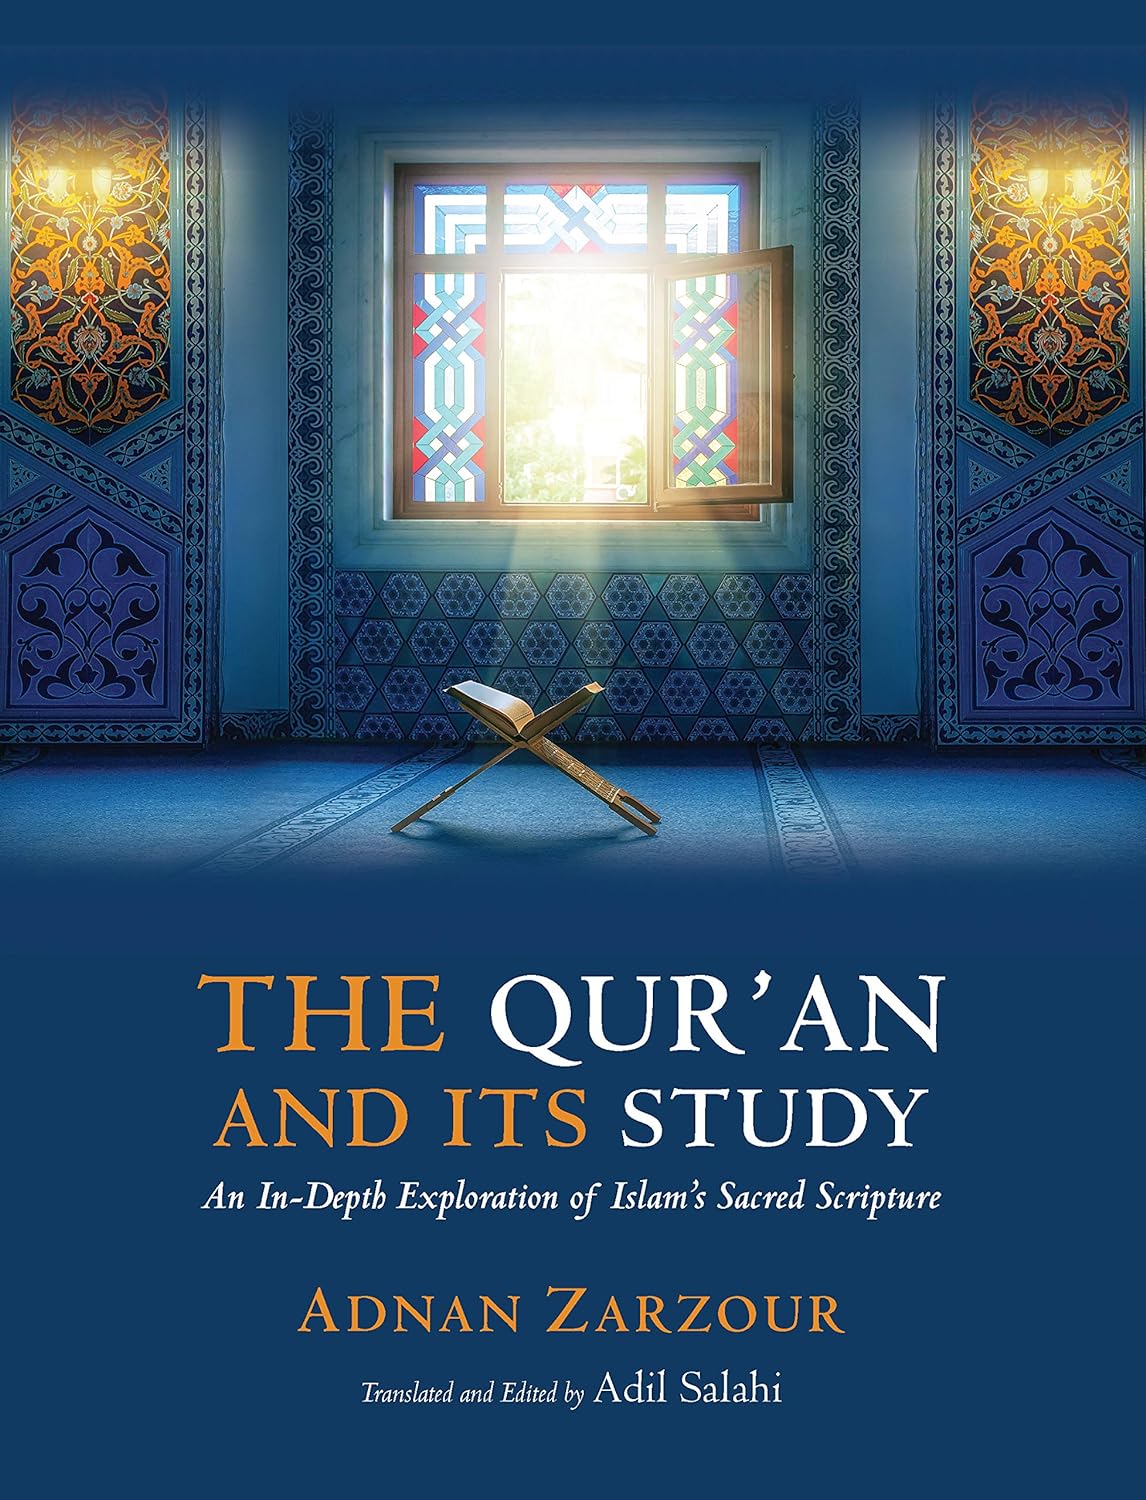 55% OFF|DAMAGED|The Qur'an and Its Study (An In Depth Exploration of Islam's Sacred Scripture)